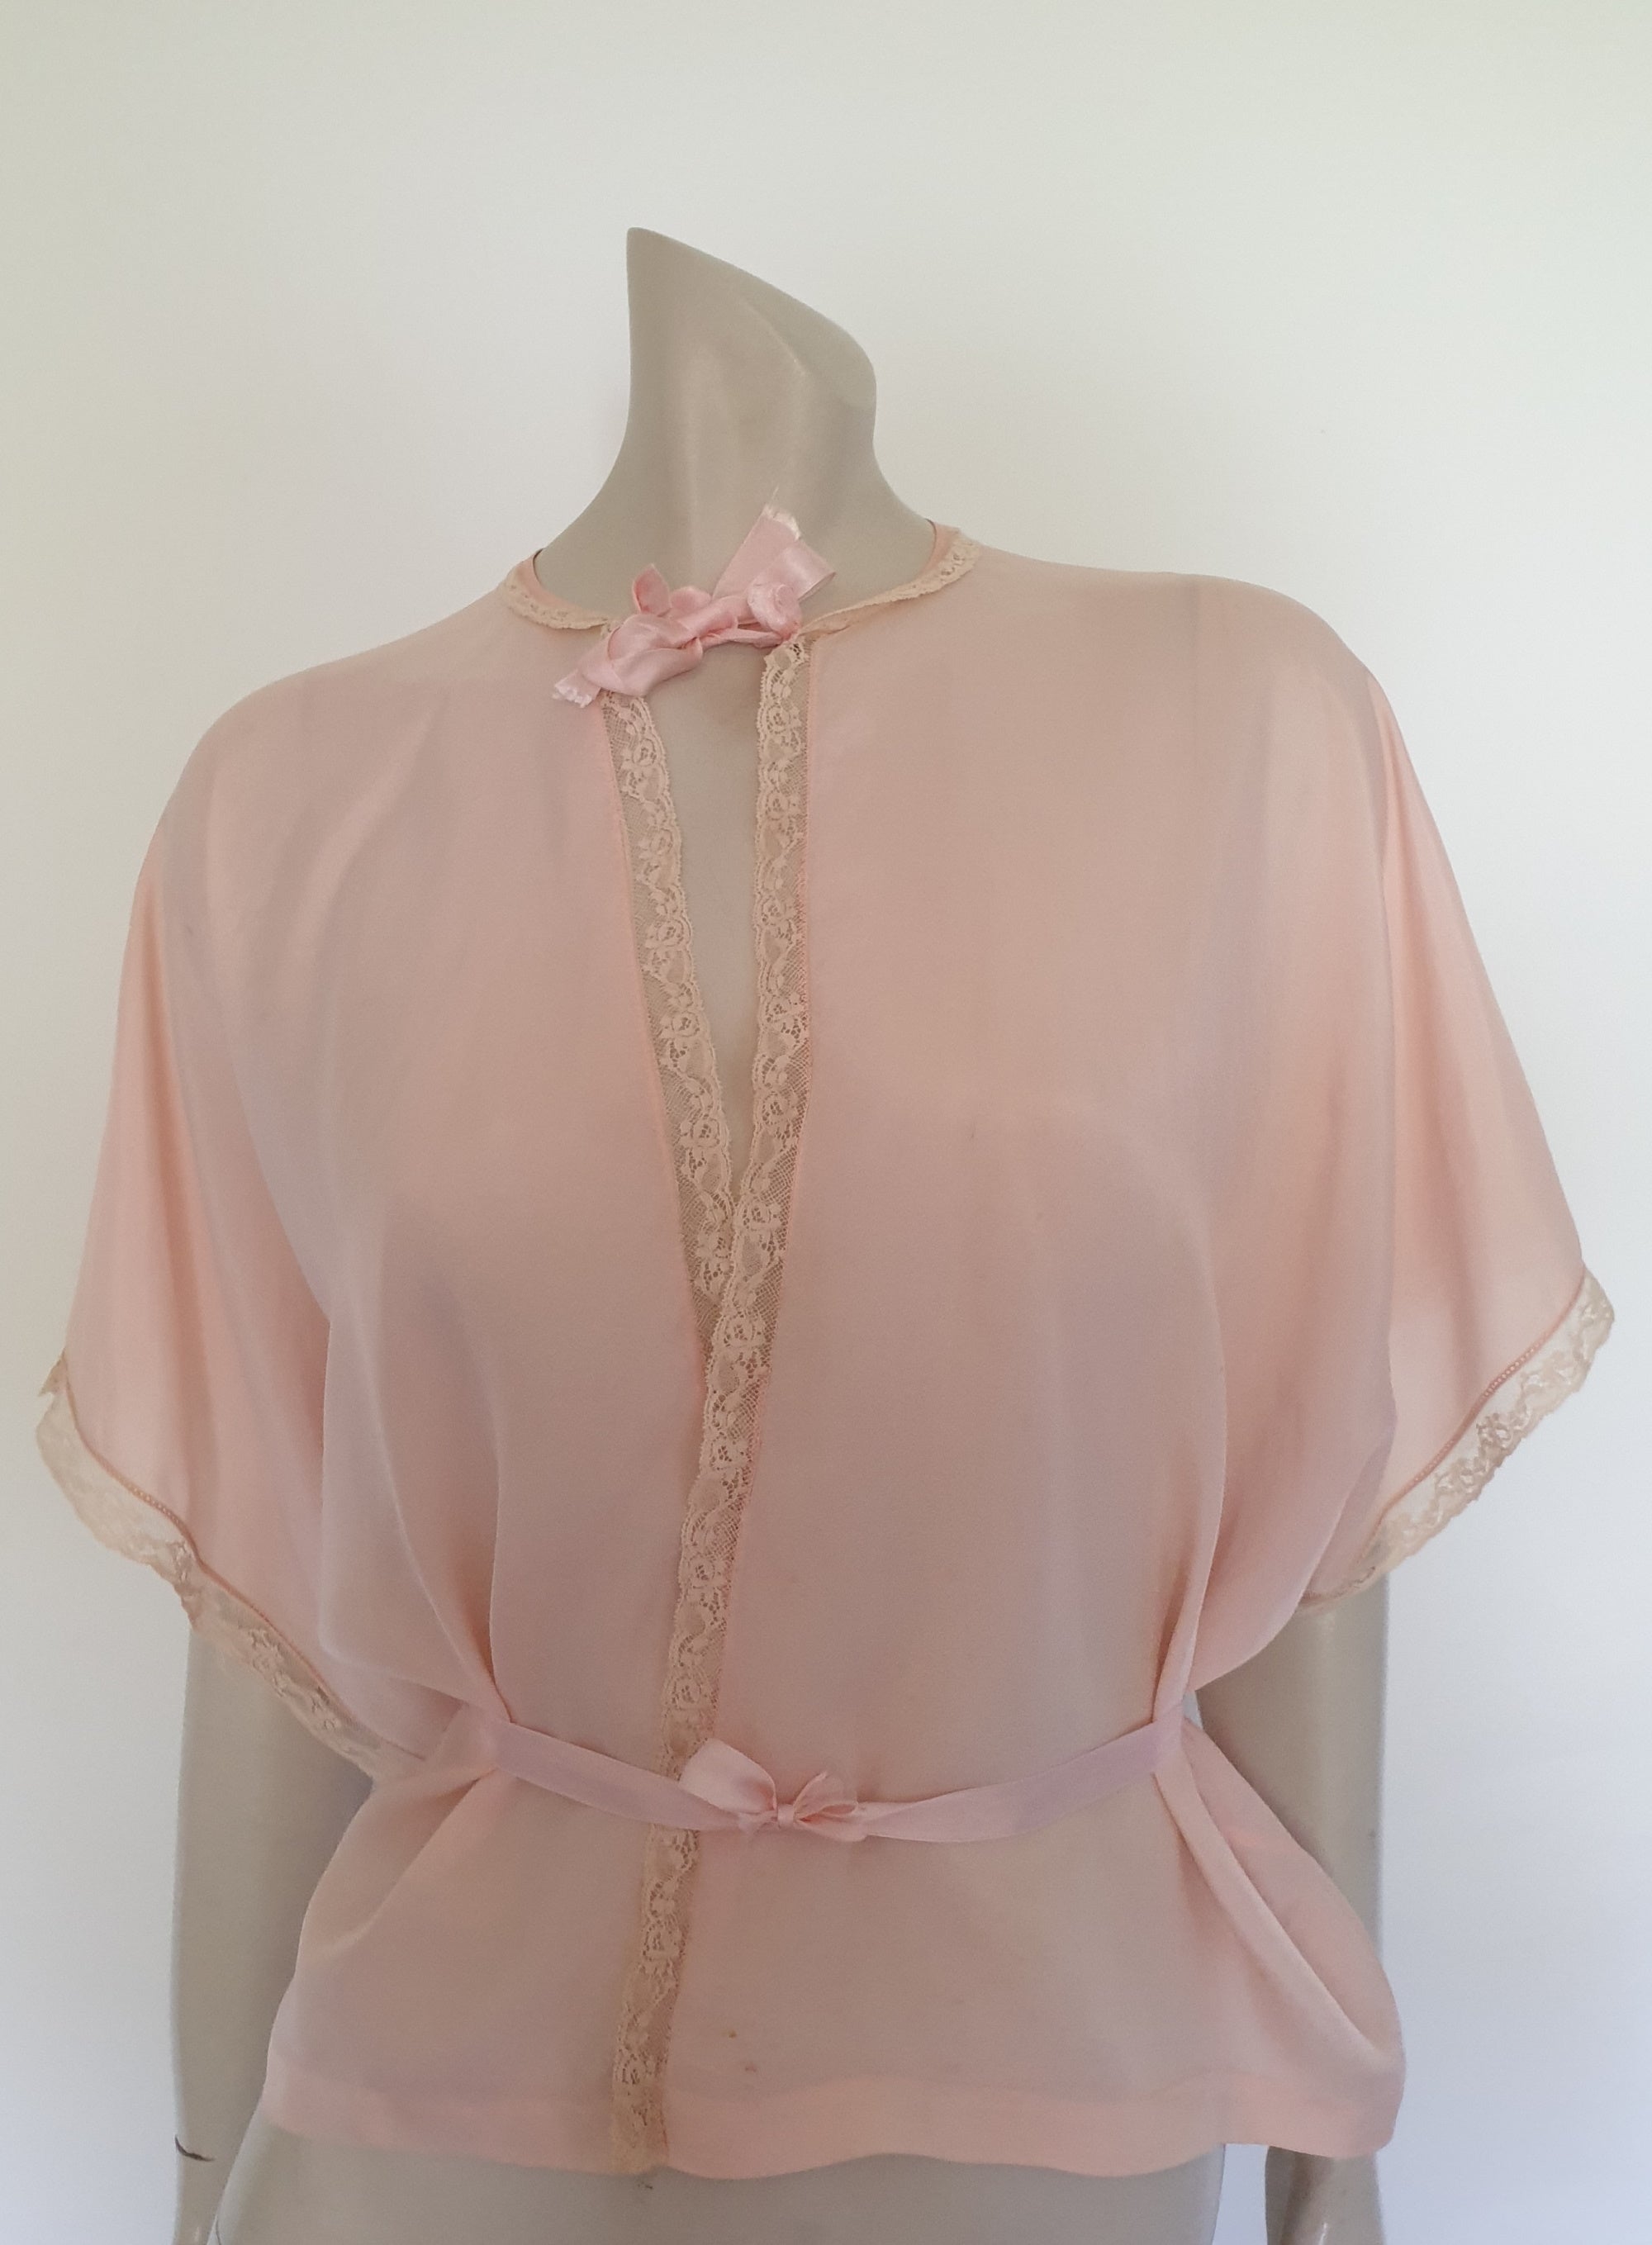 1920s 1930s vintage loose fitting summer bed jacket boudoir jacket with dolman sleeves